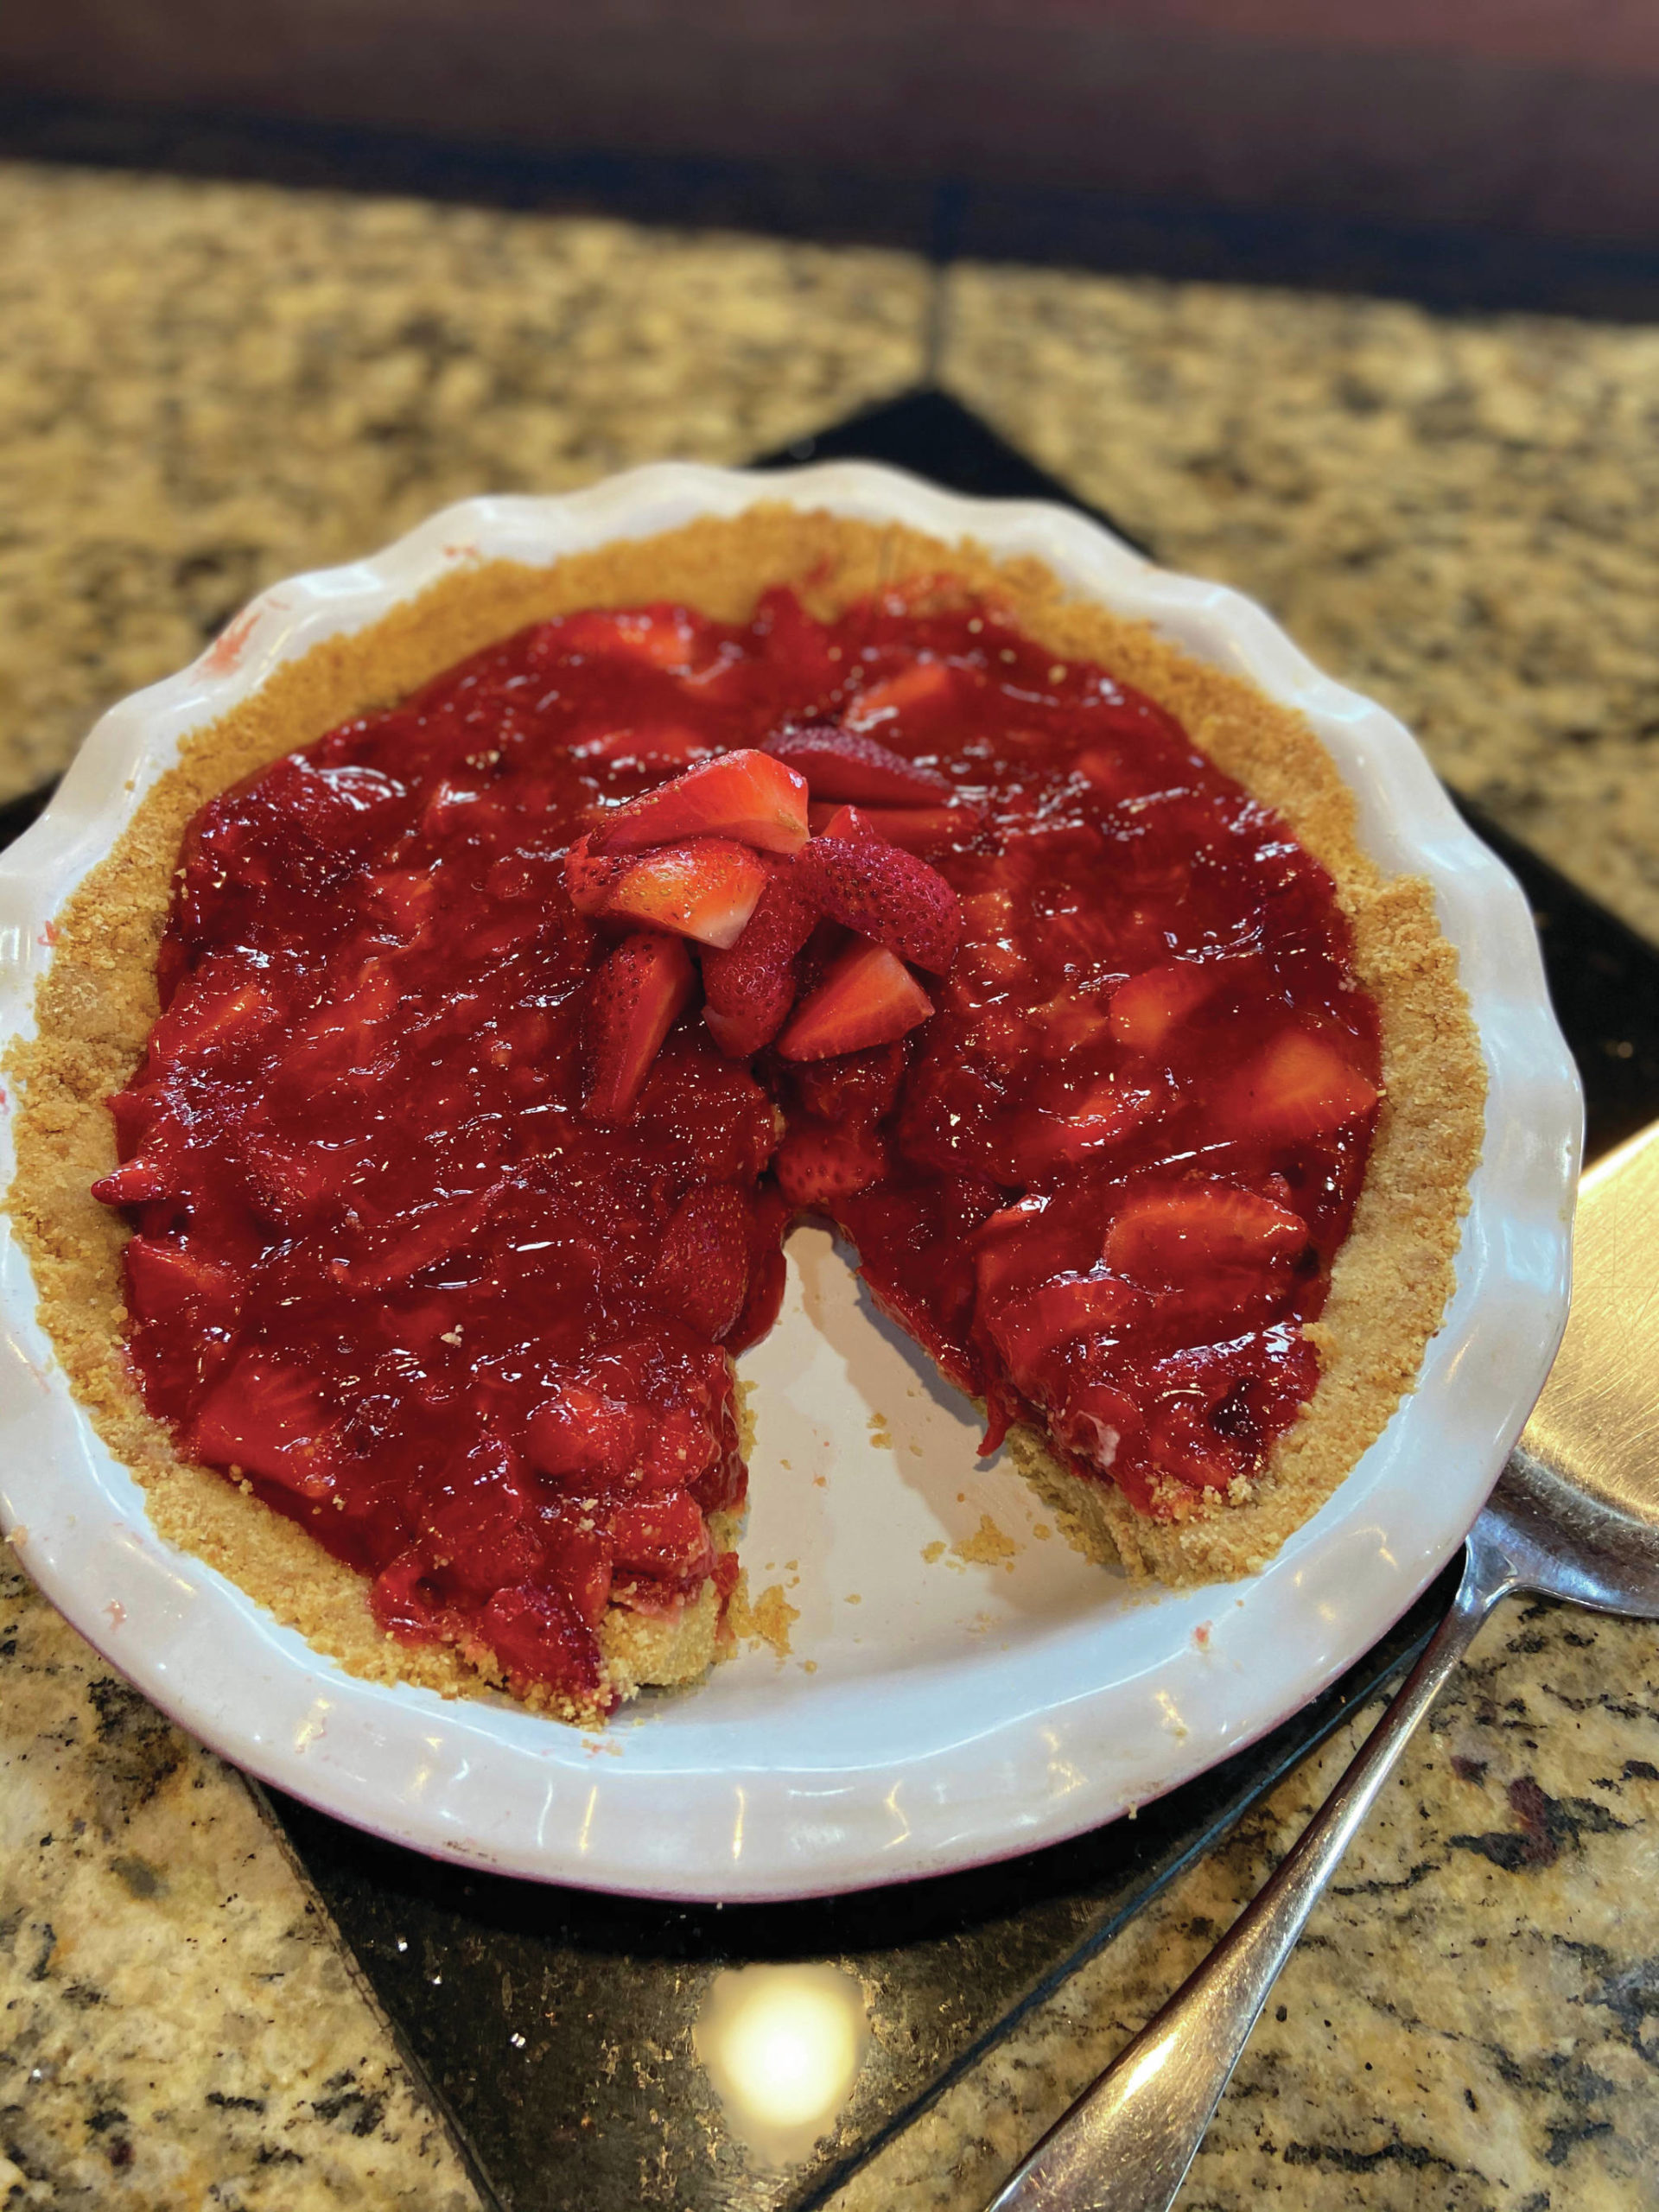 Teri Robl’s strawberry pie makes a great Father’s Day dessert, as seen here on Tuesday, June 16, 2020, in her Homer, Alaska kitchen. (Photo by Teri Robl)